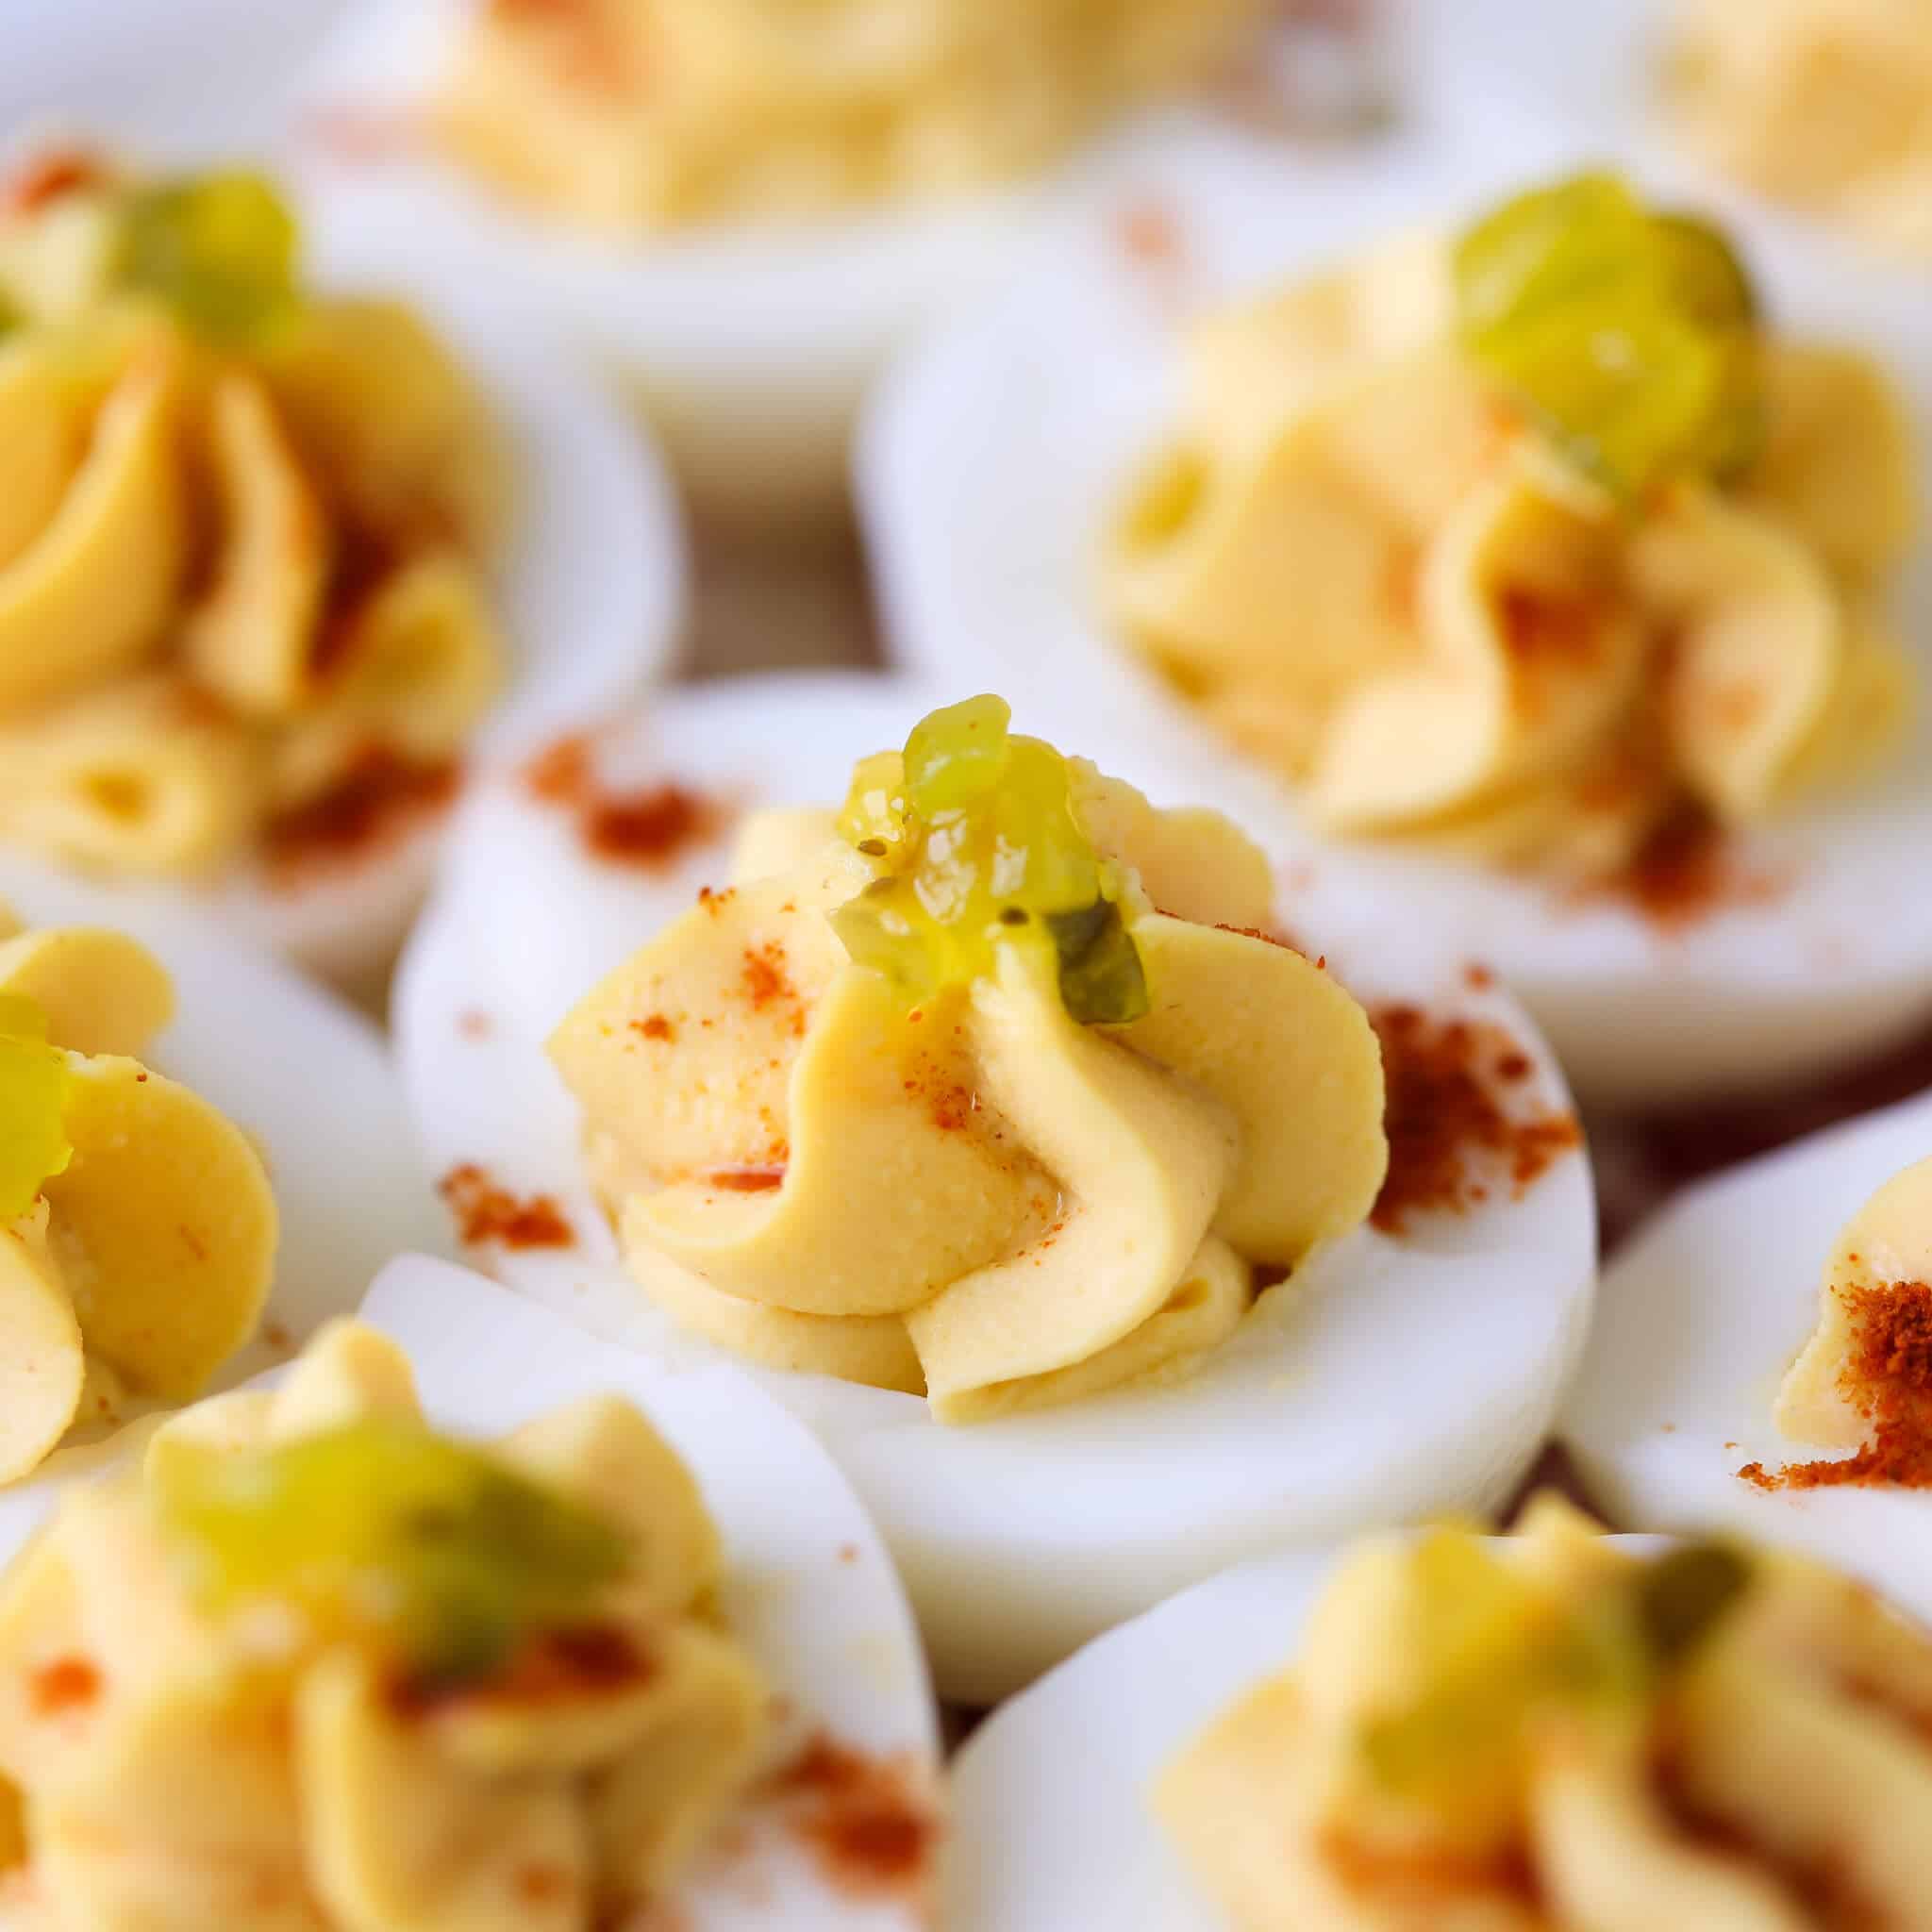 Deviled eggs topped with green relish and paprika.